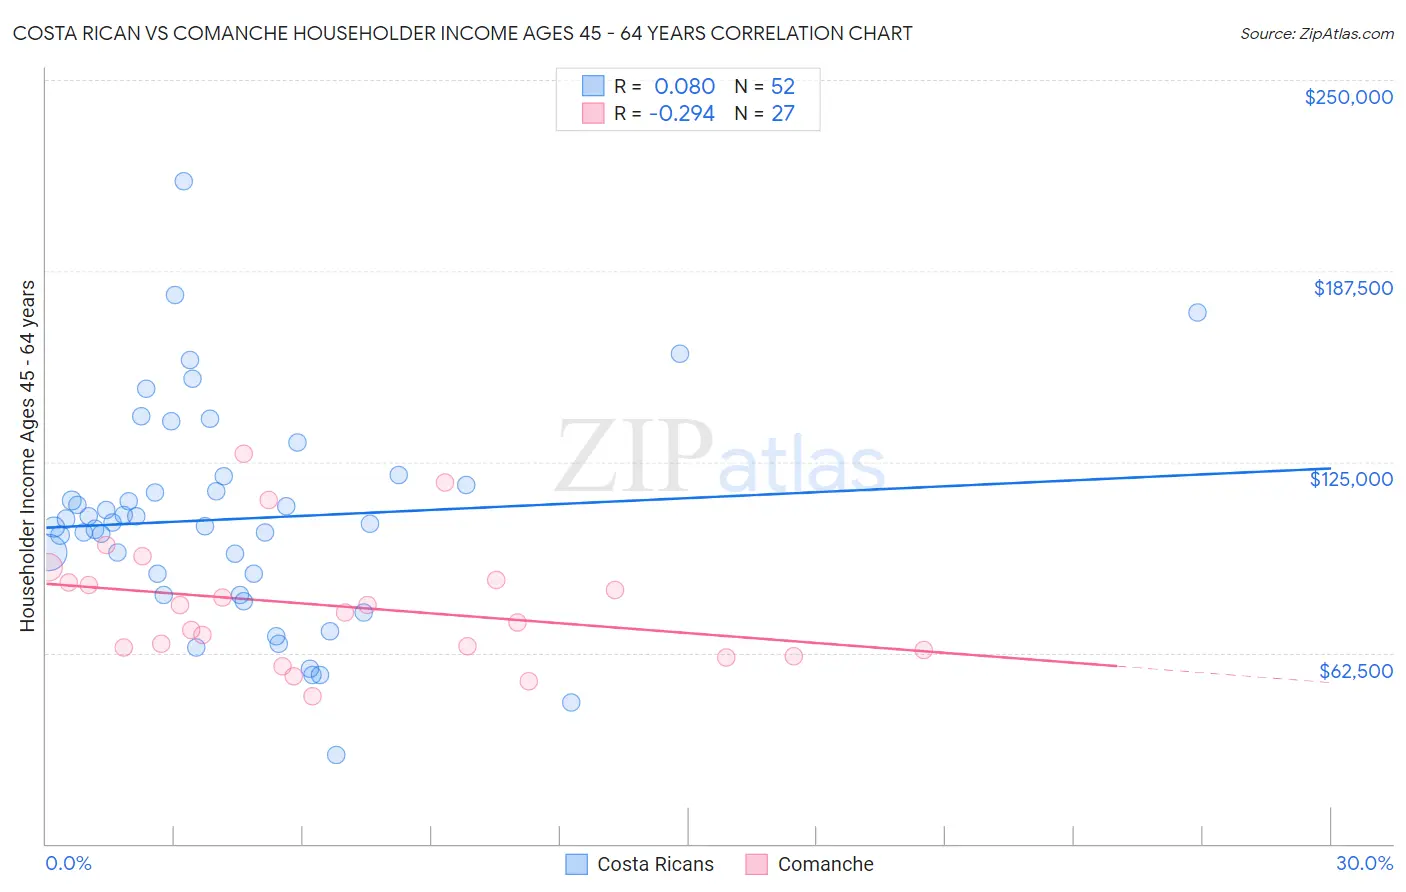 Costa Rican vs Comanche Householder Income Ages 45 - 64 years